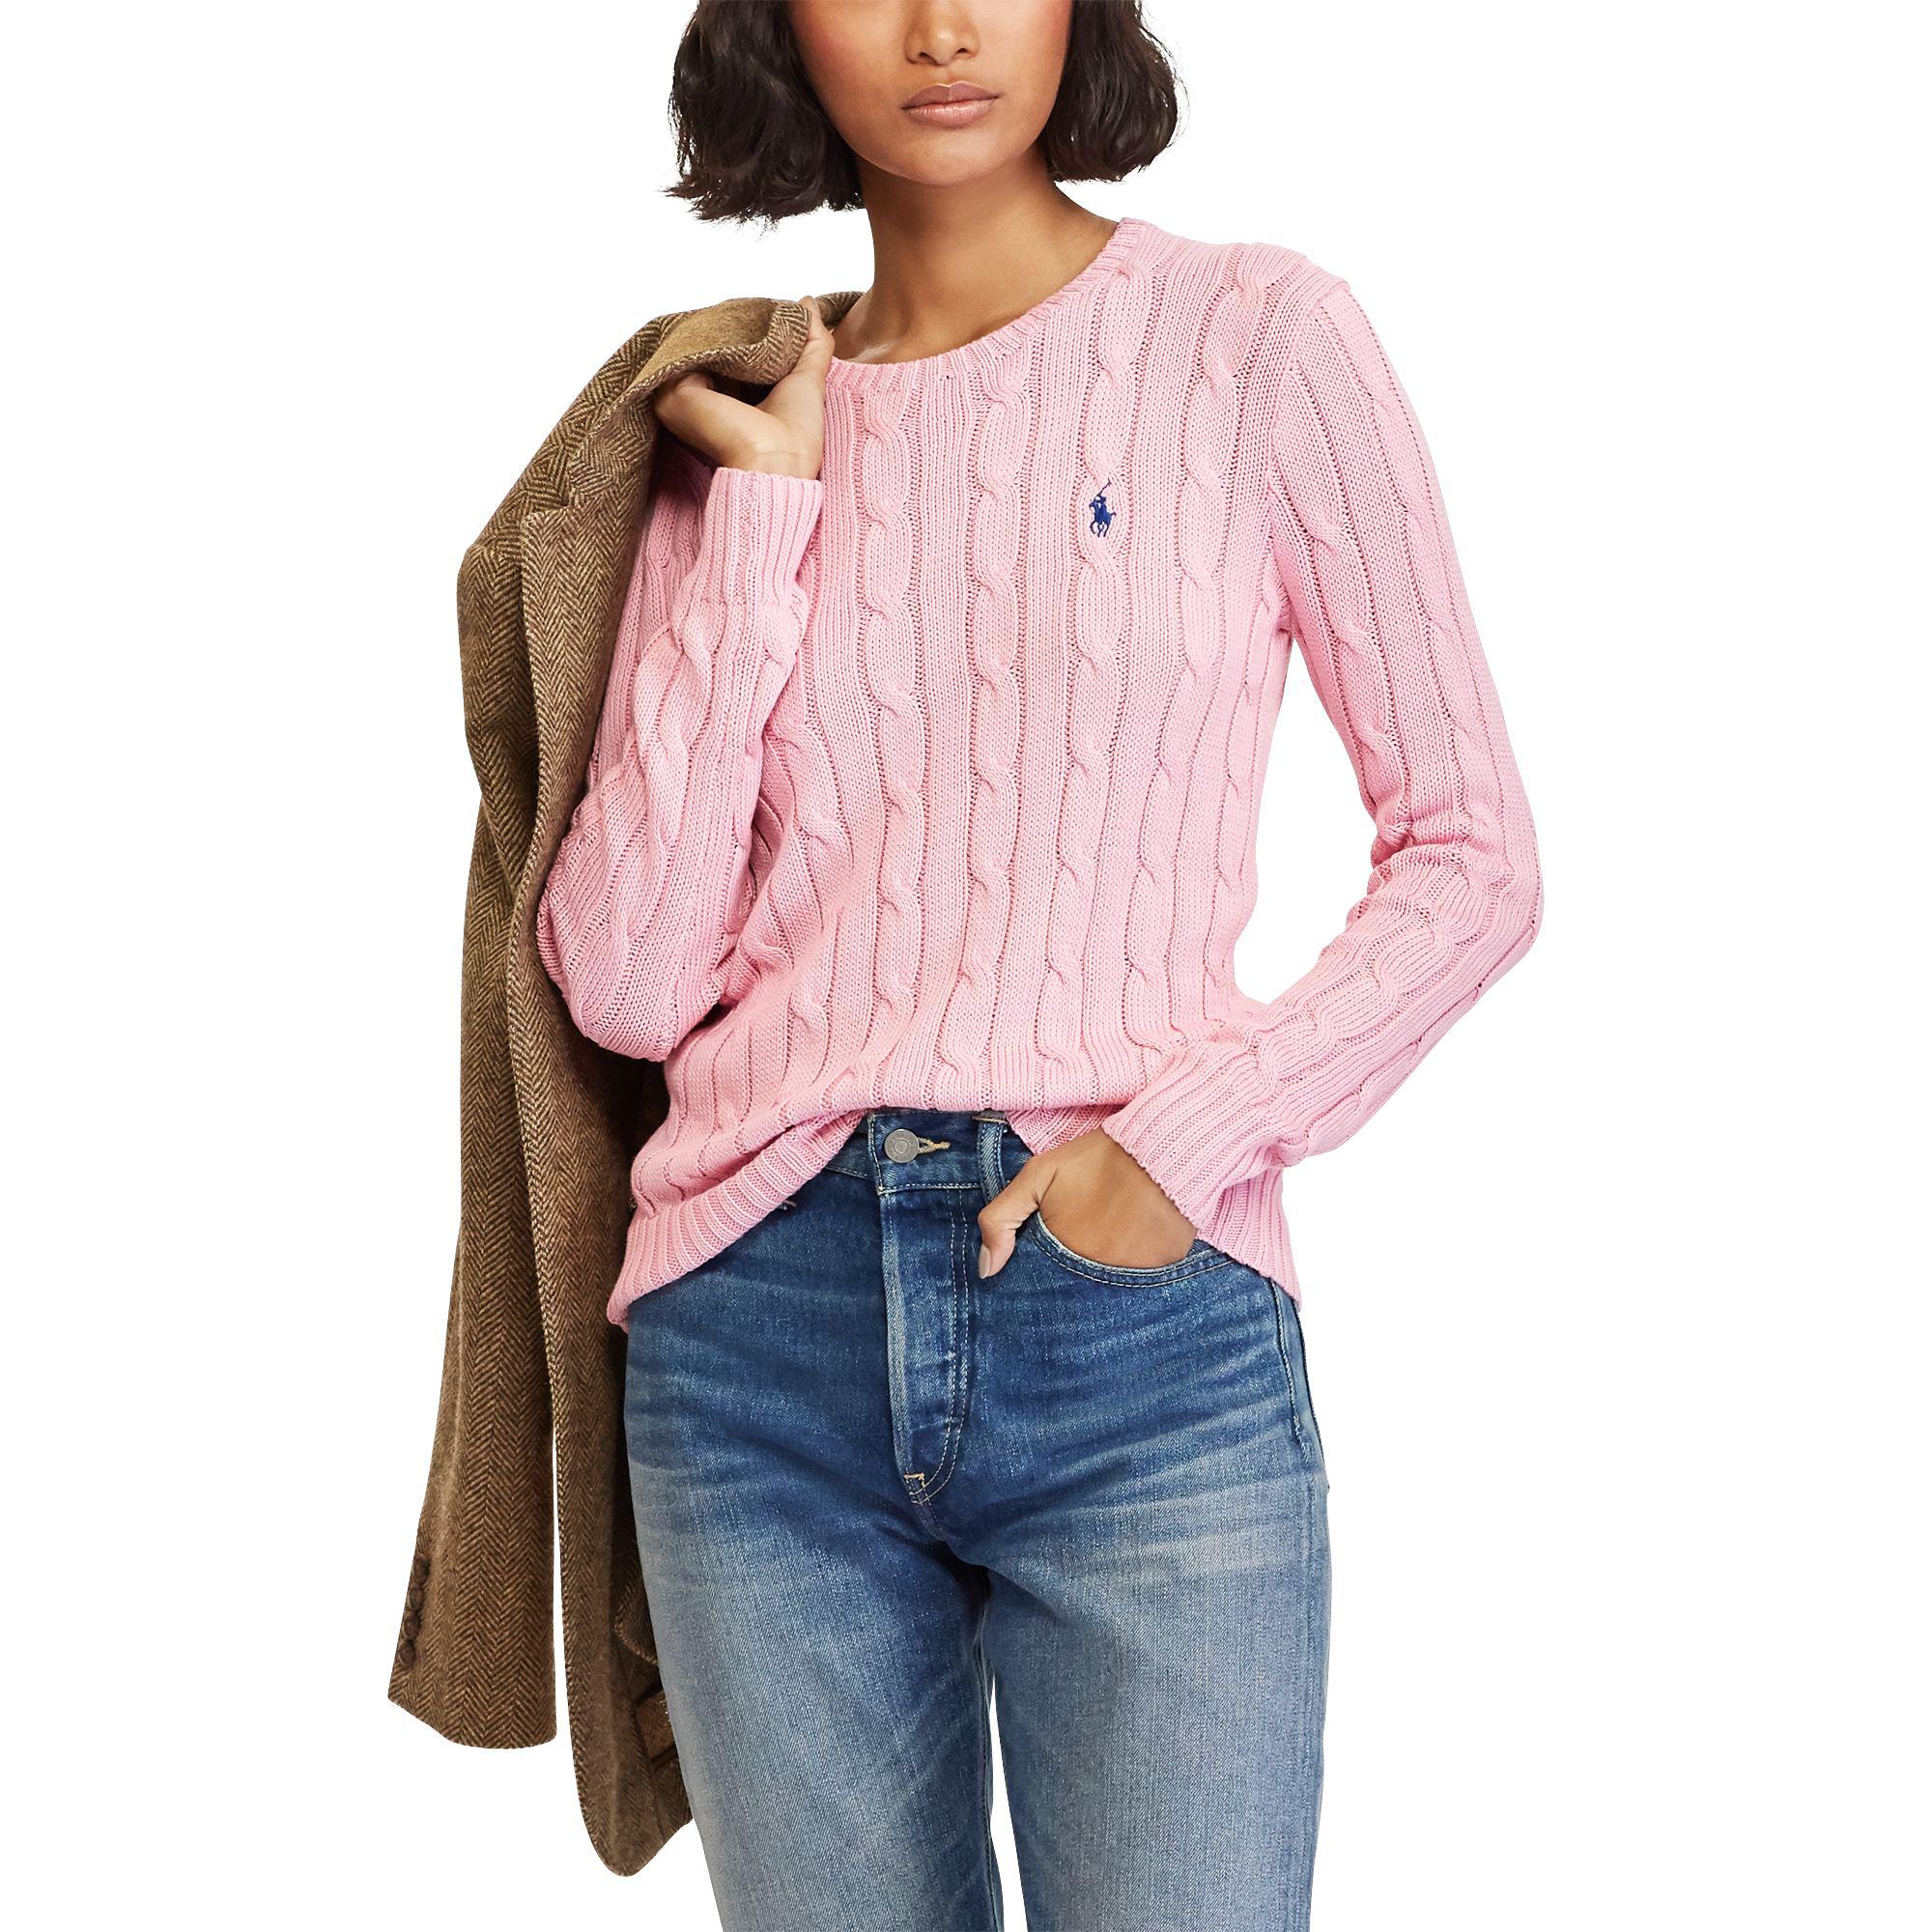 Polo Ralph Lauren Cable-knit Cotton Sweater in Pink